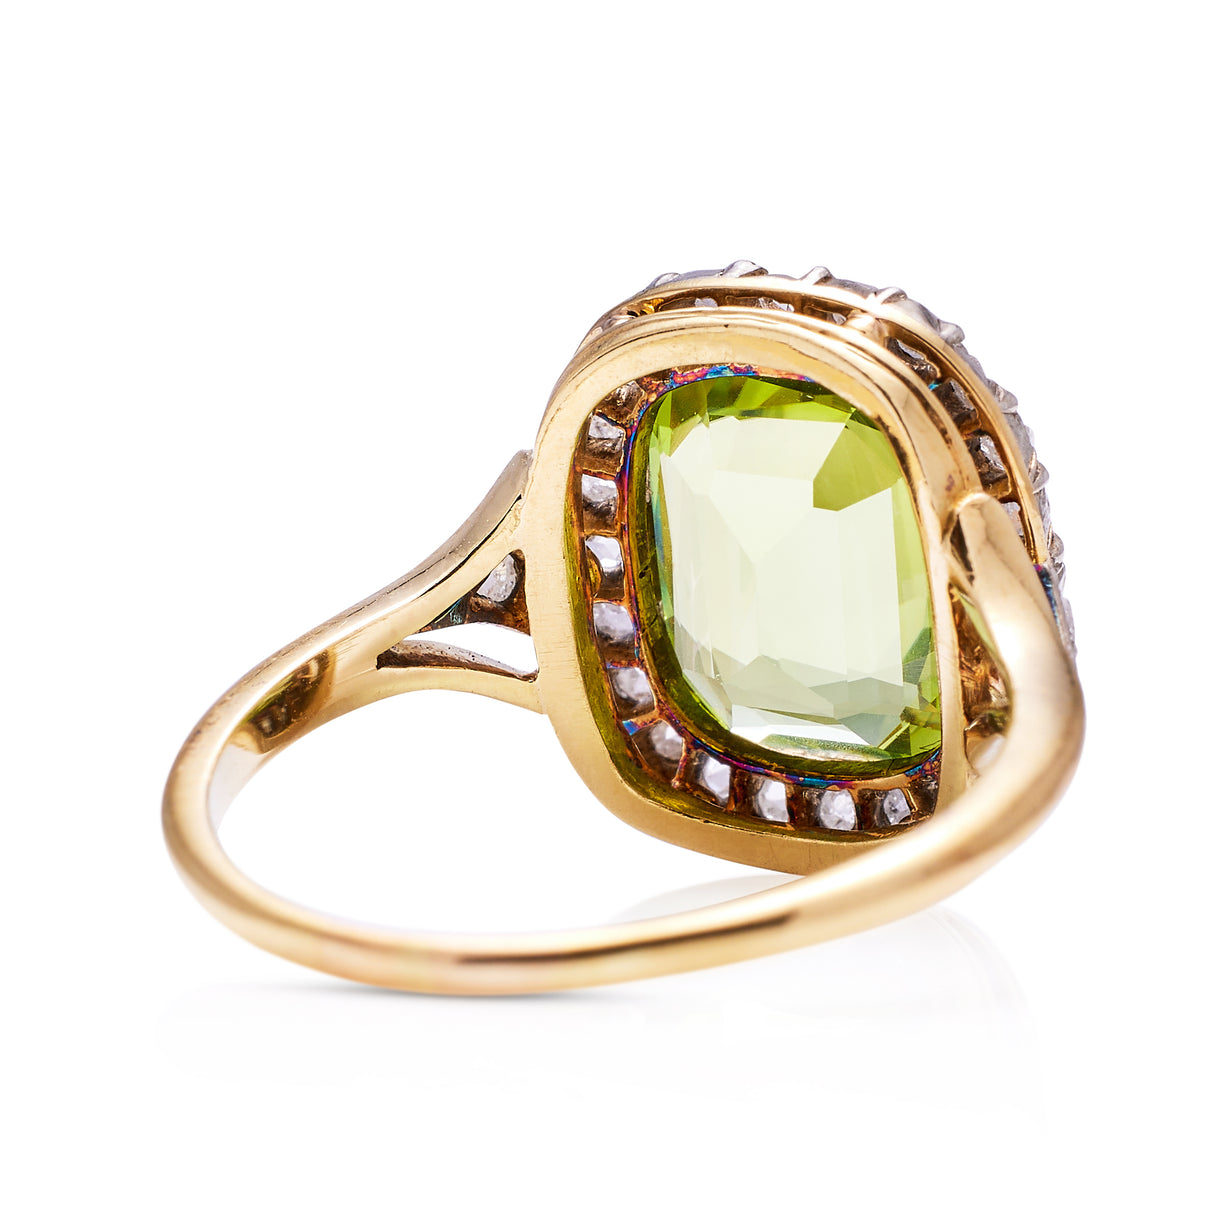 antique peridot and diamond ring, rear view.